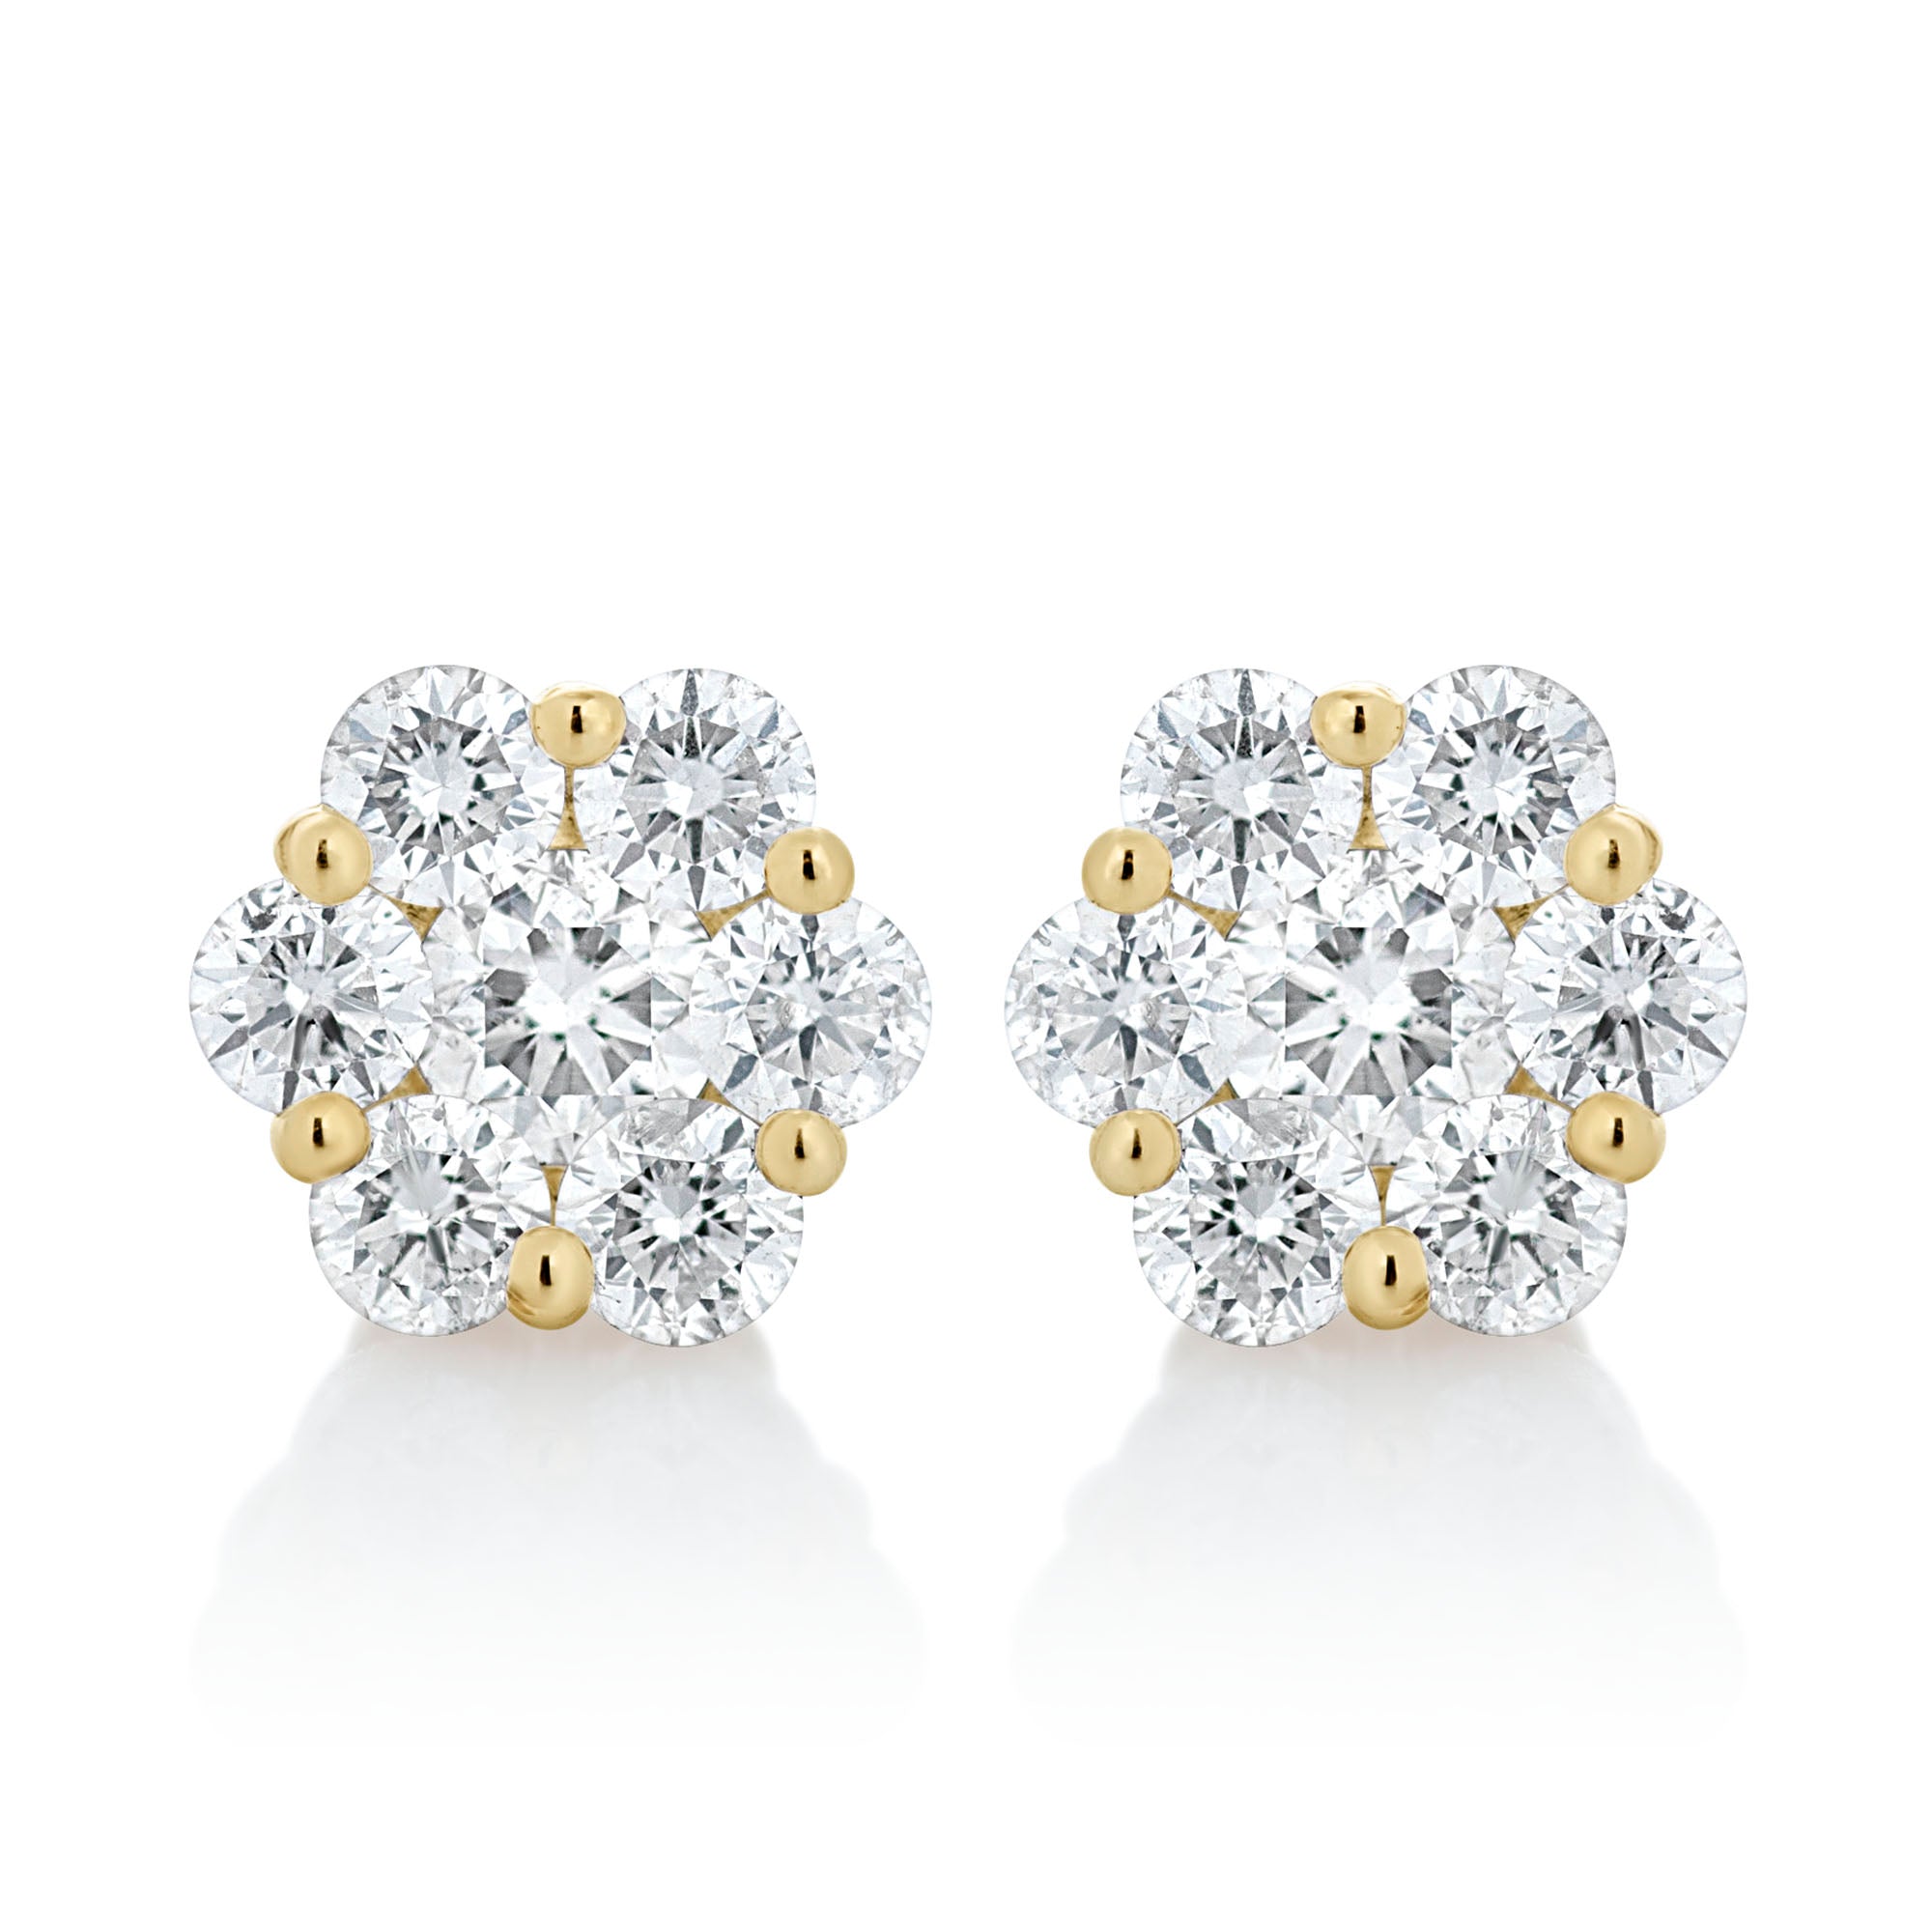 Buy One Gram Gold Daily Use Small American Diamond Earrings Design Buy  Online